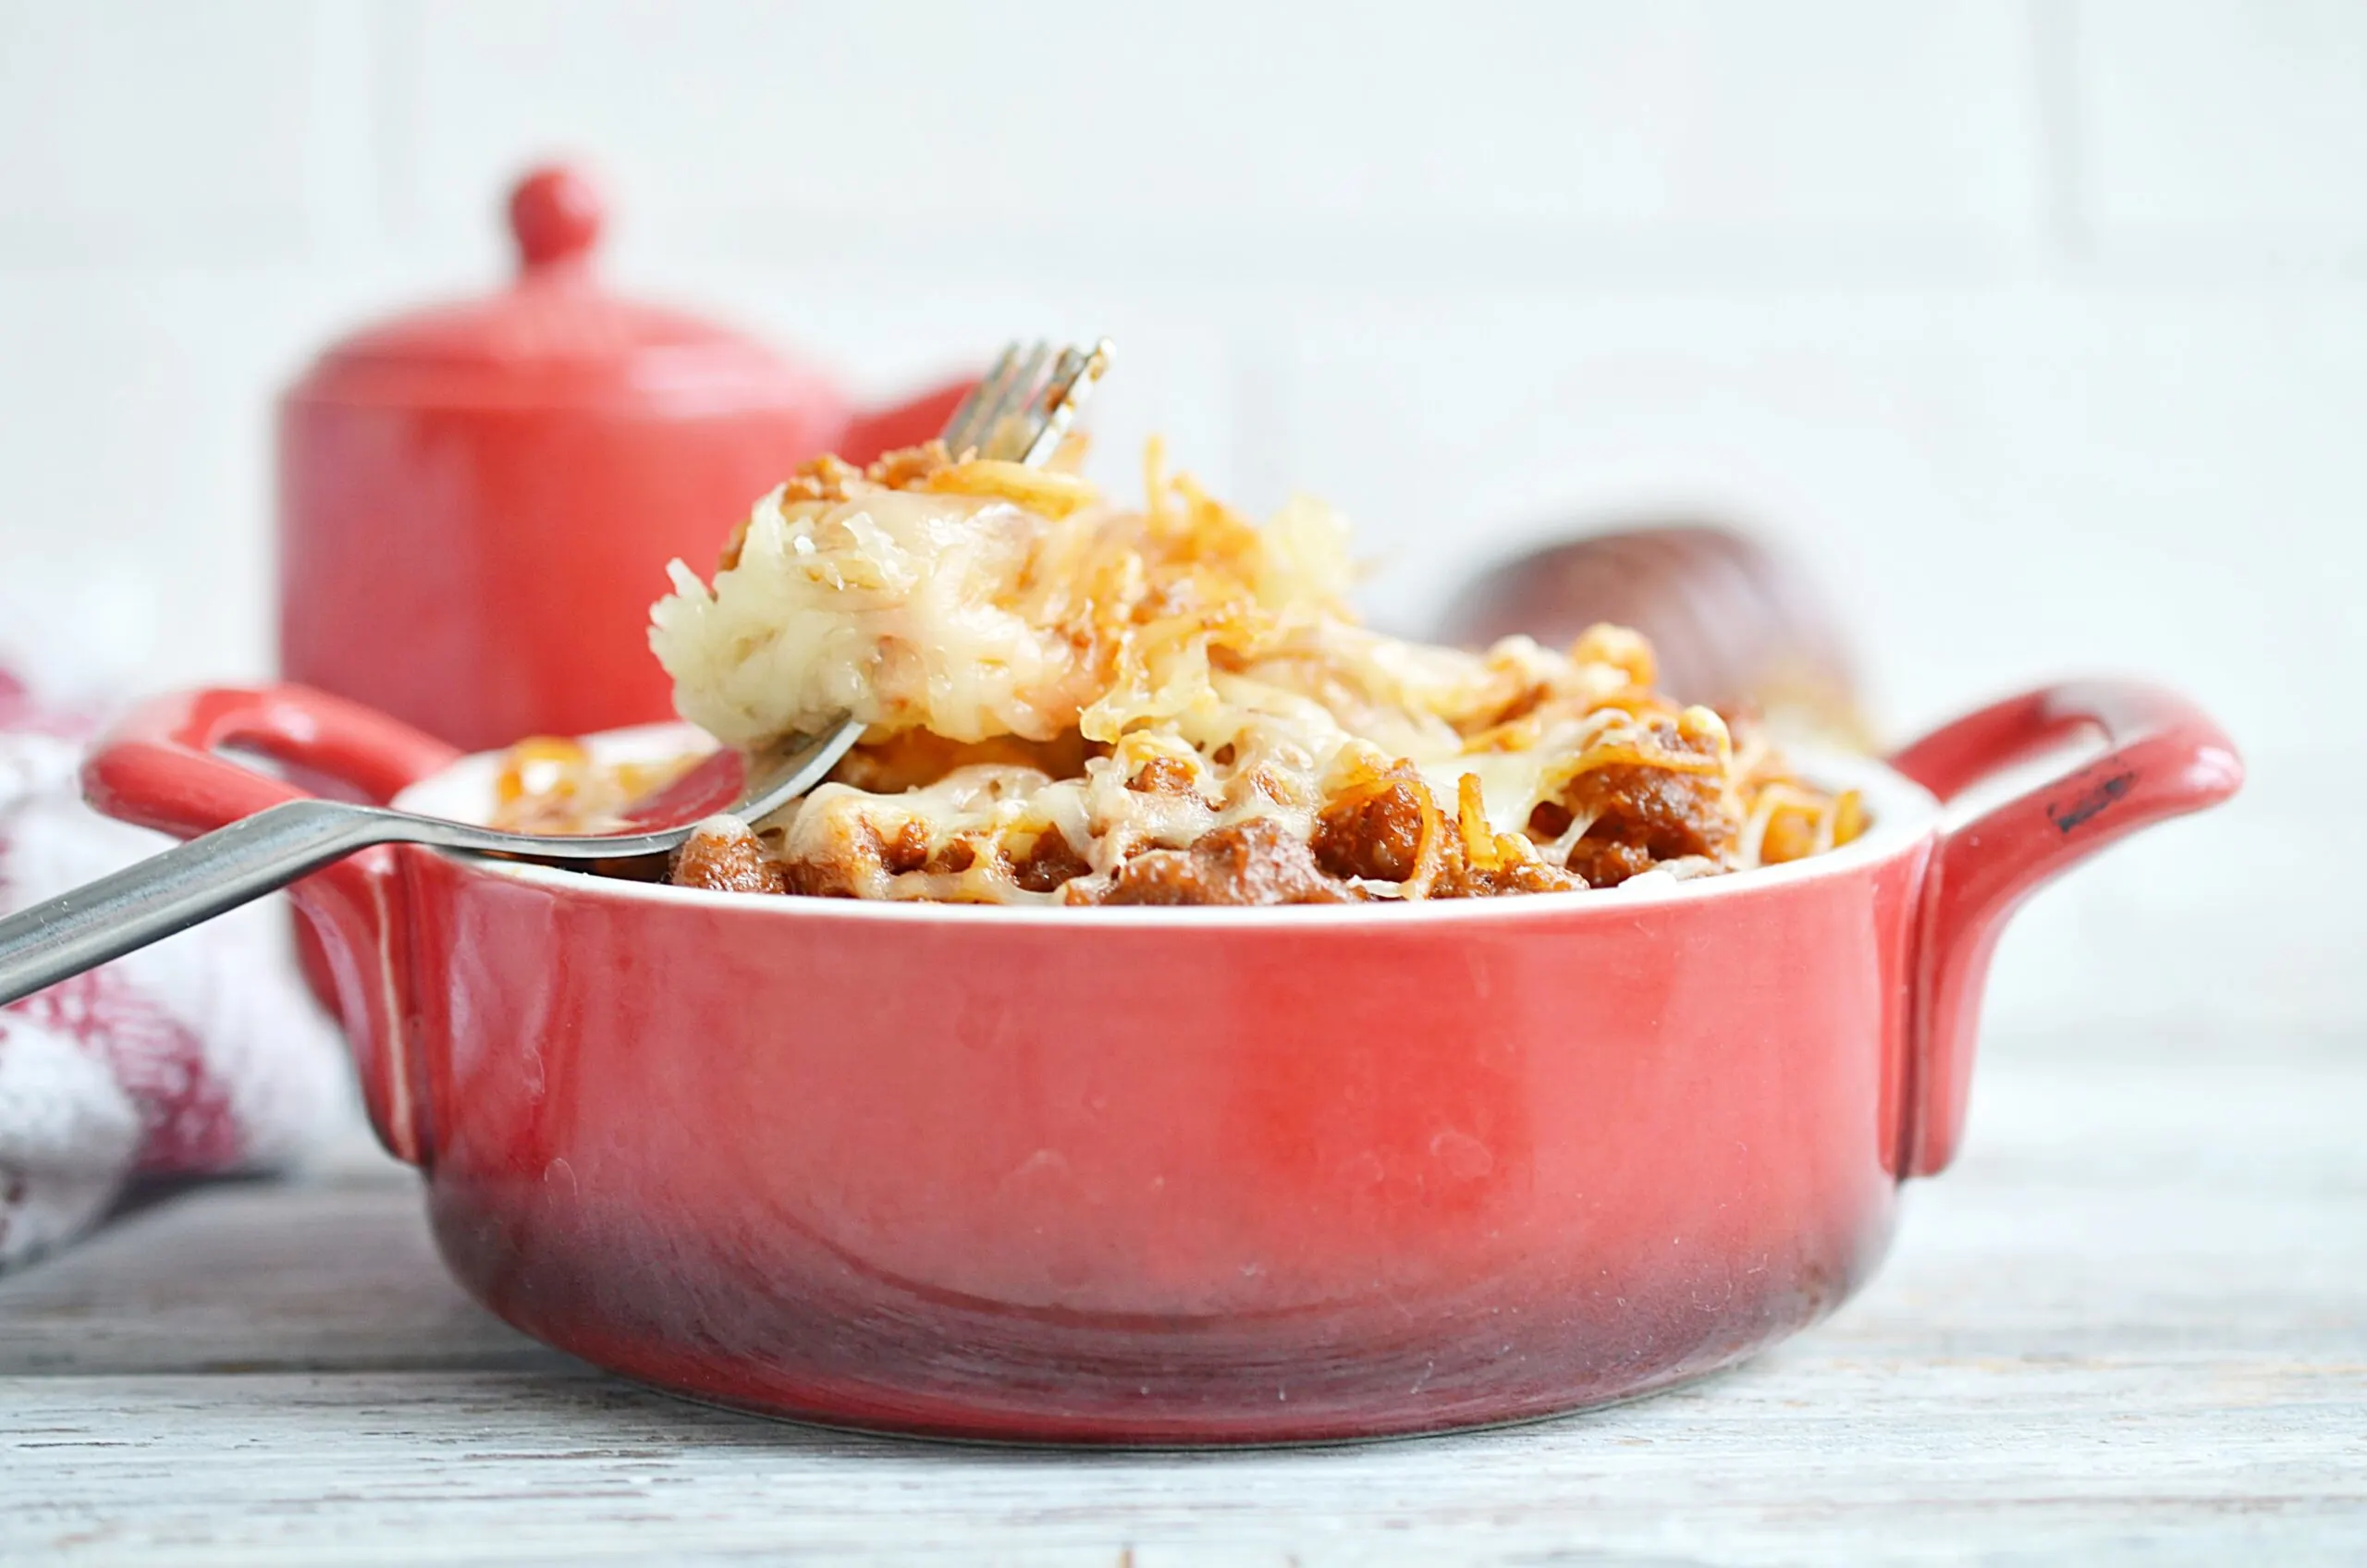 A red dish of spaghetti casserole with a fork in it, to the side.